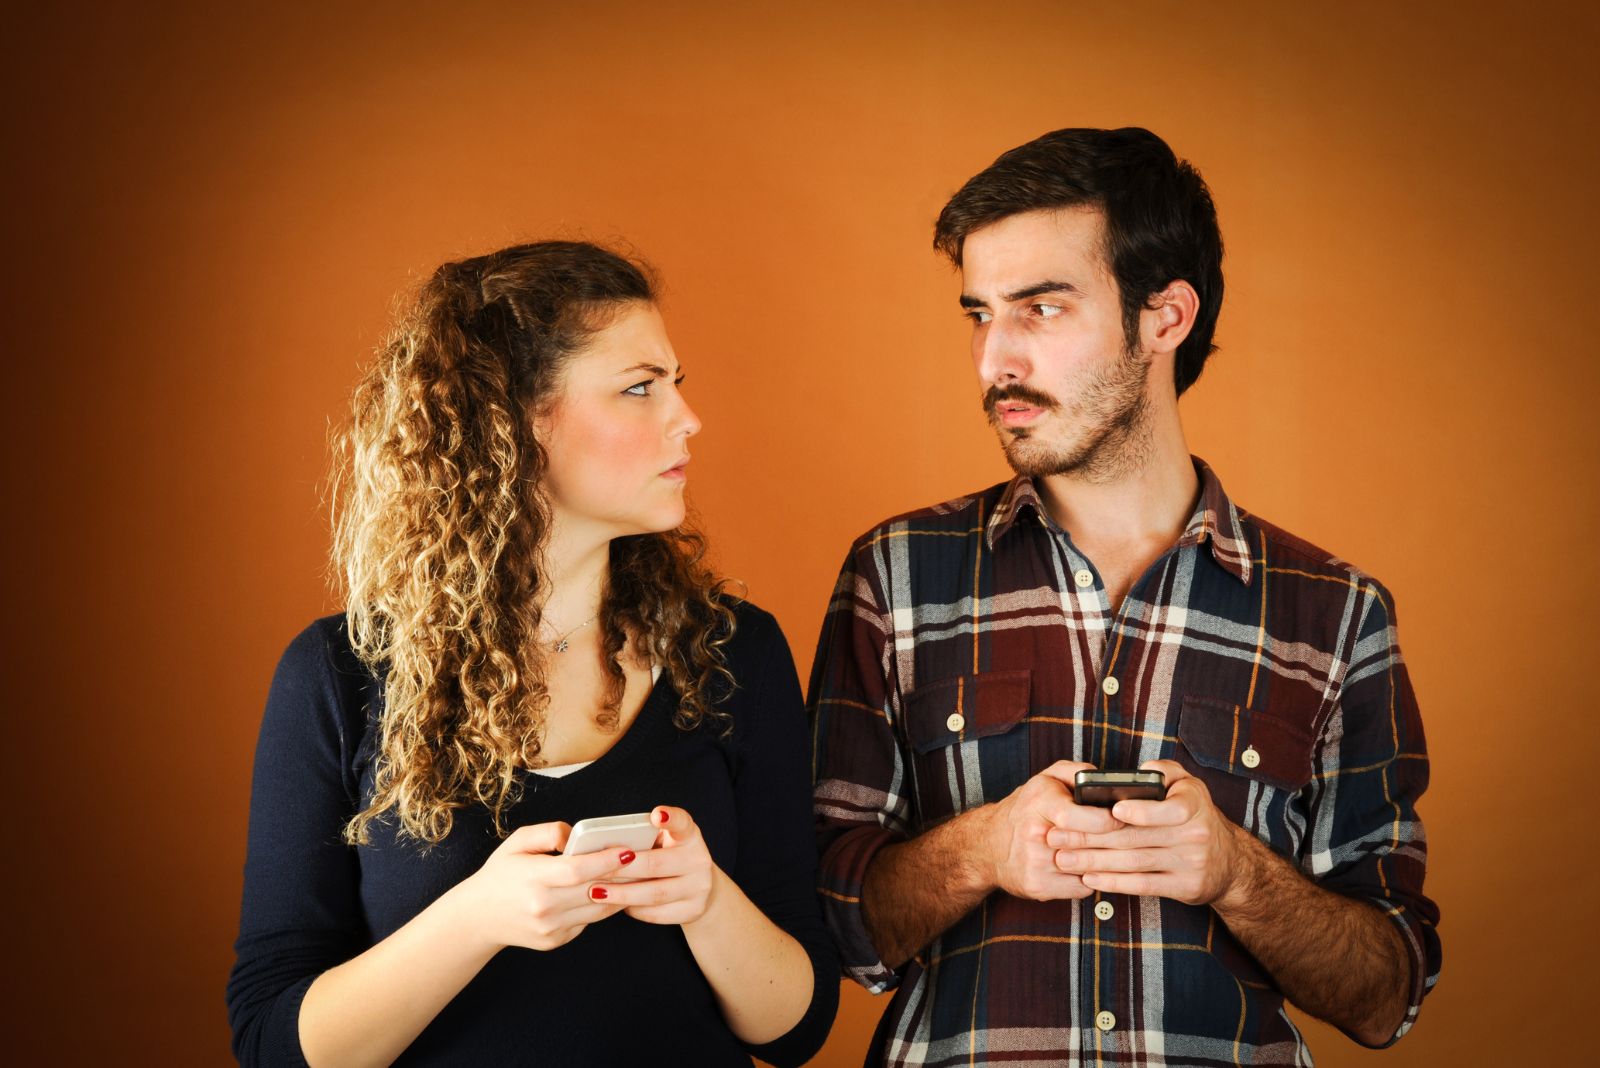 man and woman holding phones and looking at each other